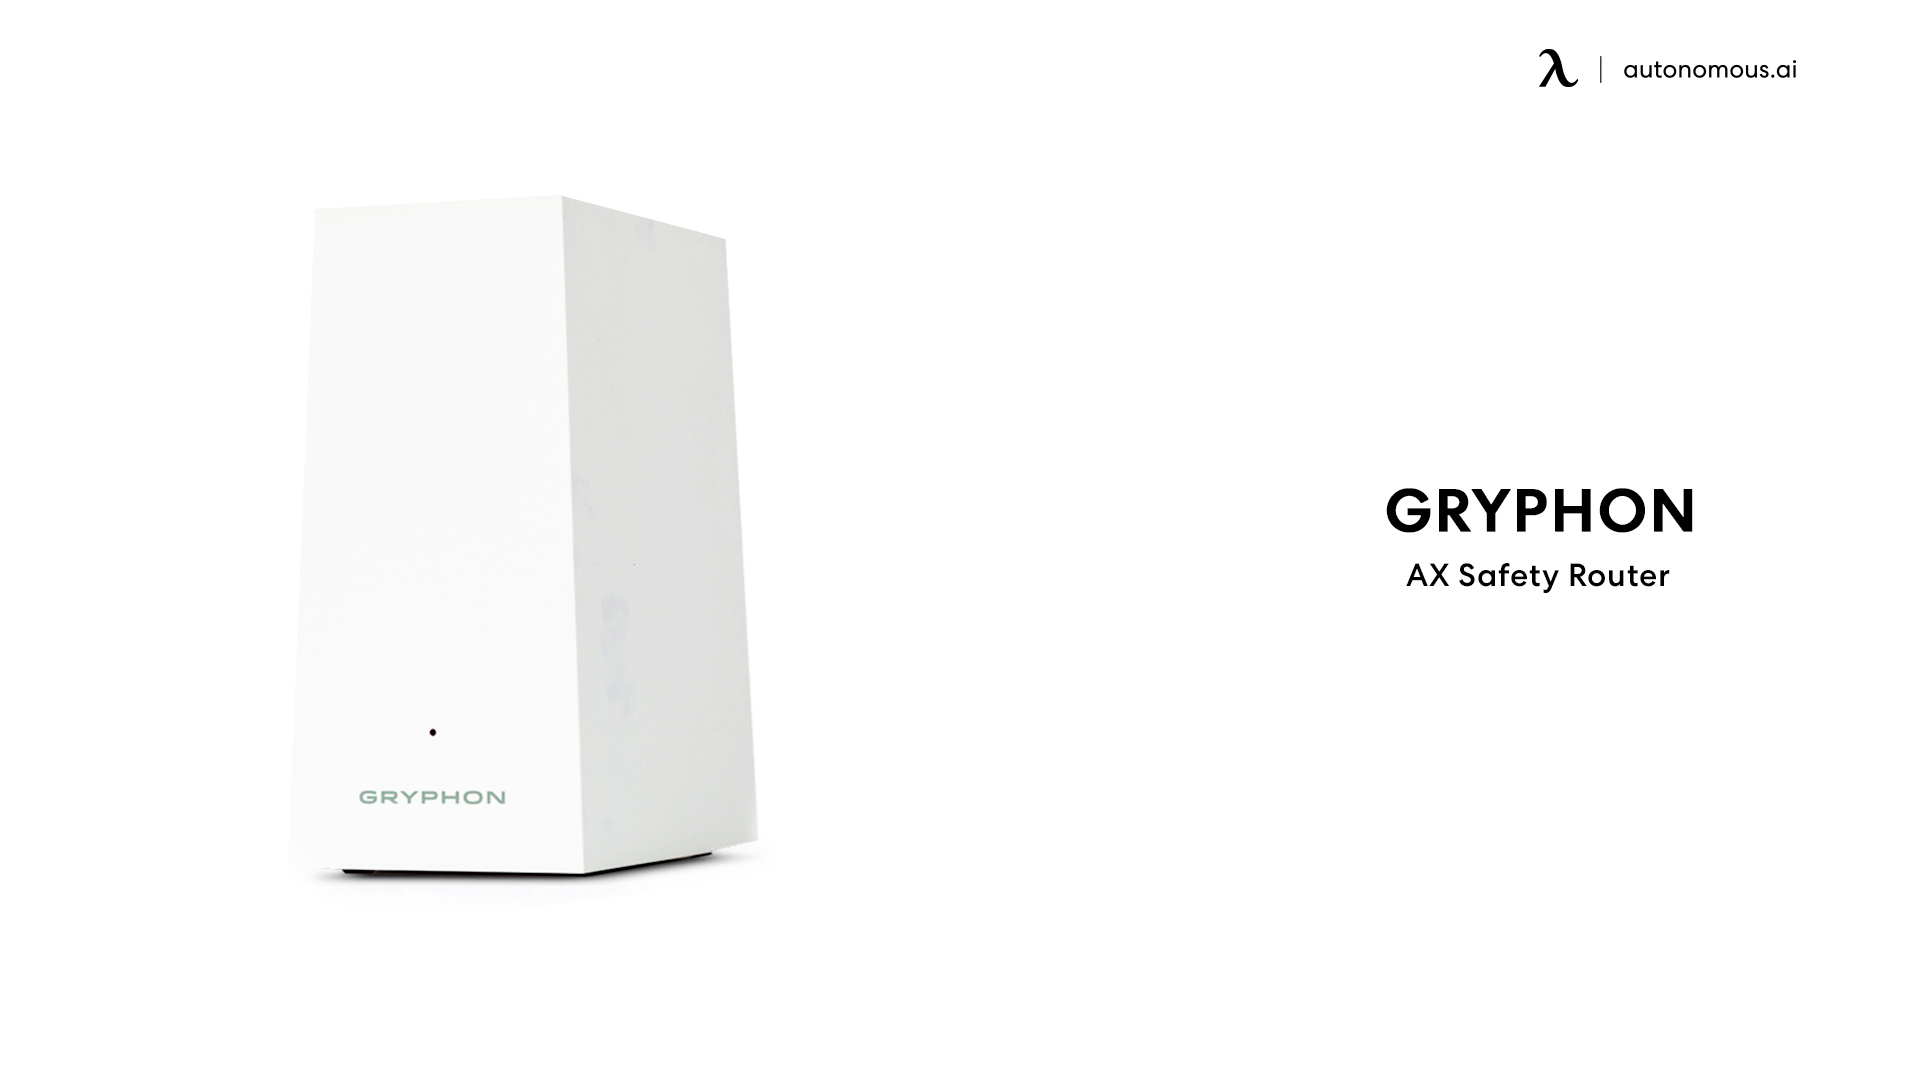 The Gryphon AX home network security devices